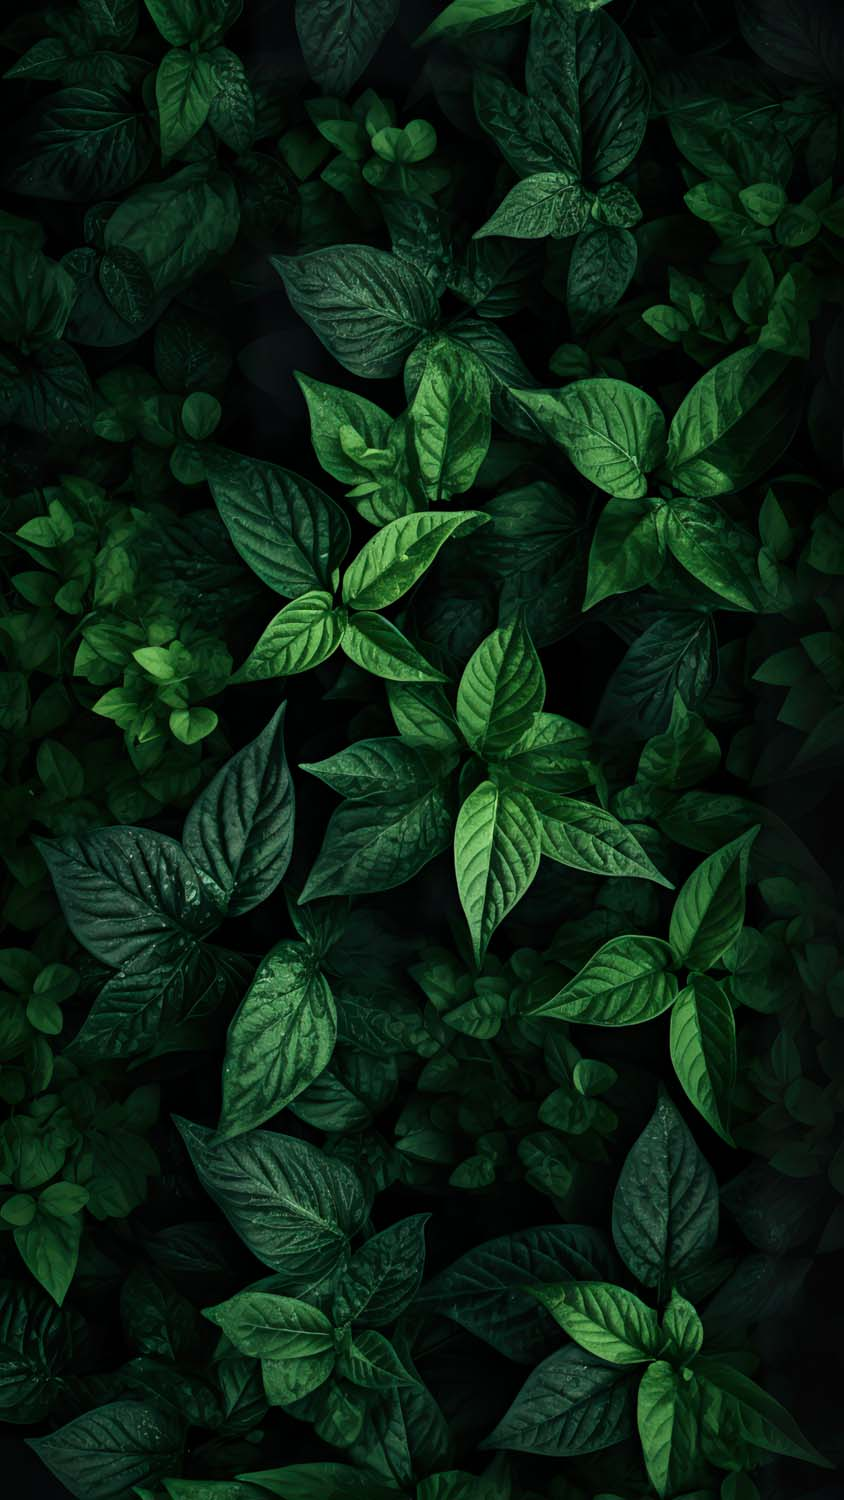 Green Foliage iPhone Wallpaper 4K  iPhone Wallpapers  iPhone Wallpapers